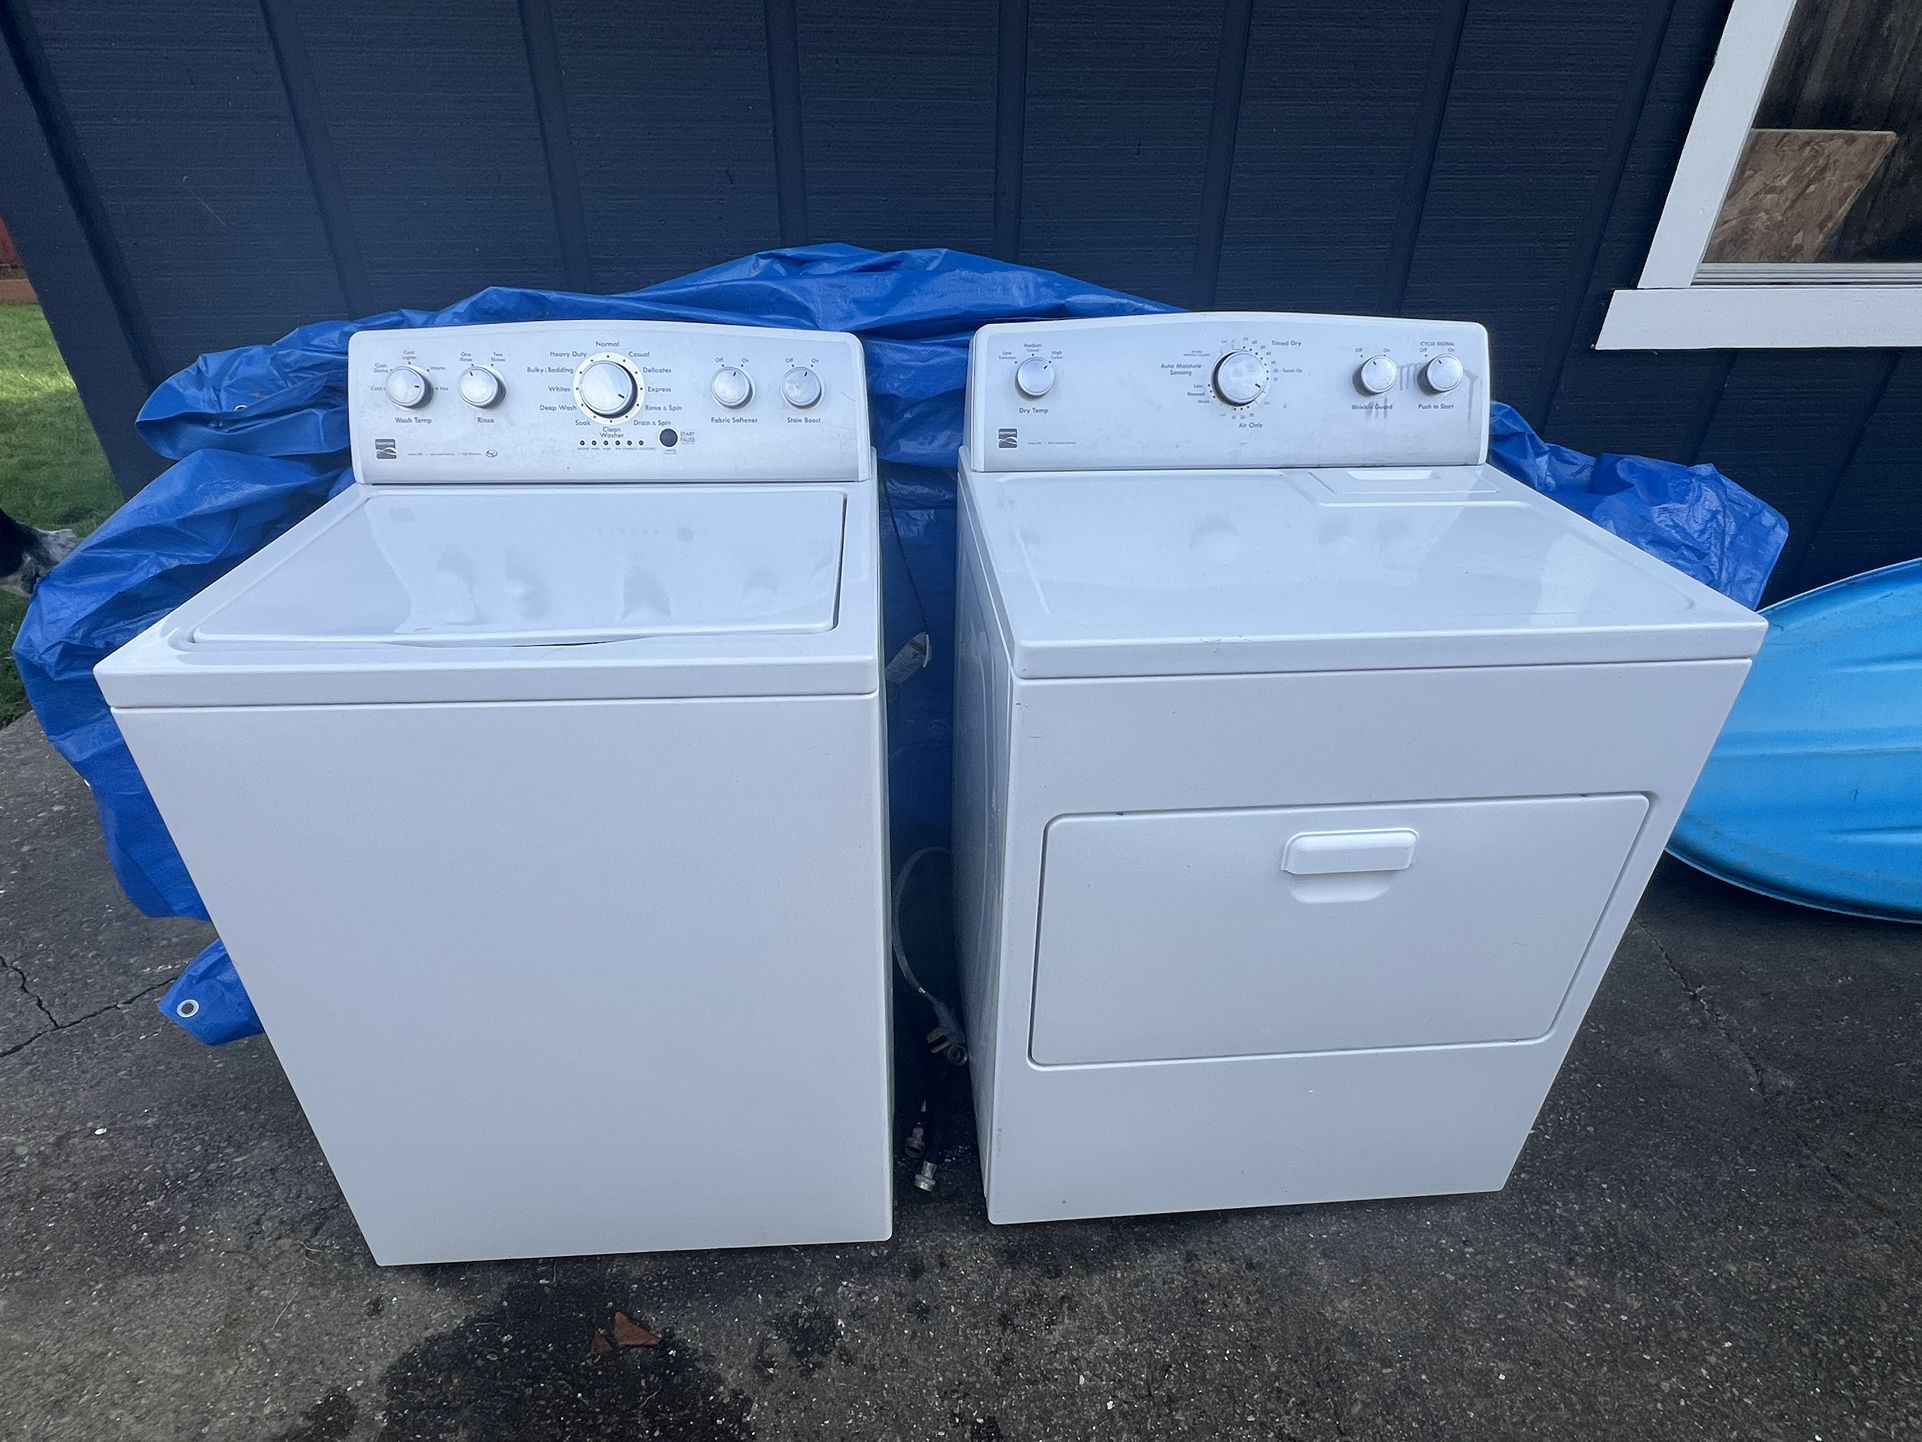 Kenmore Series 500 Washer And Dryer